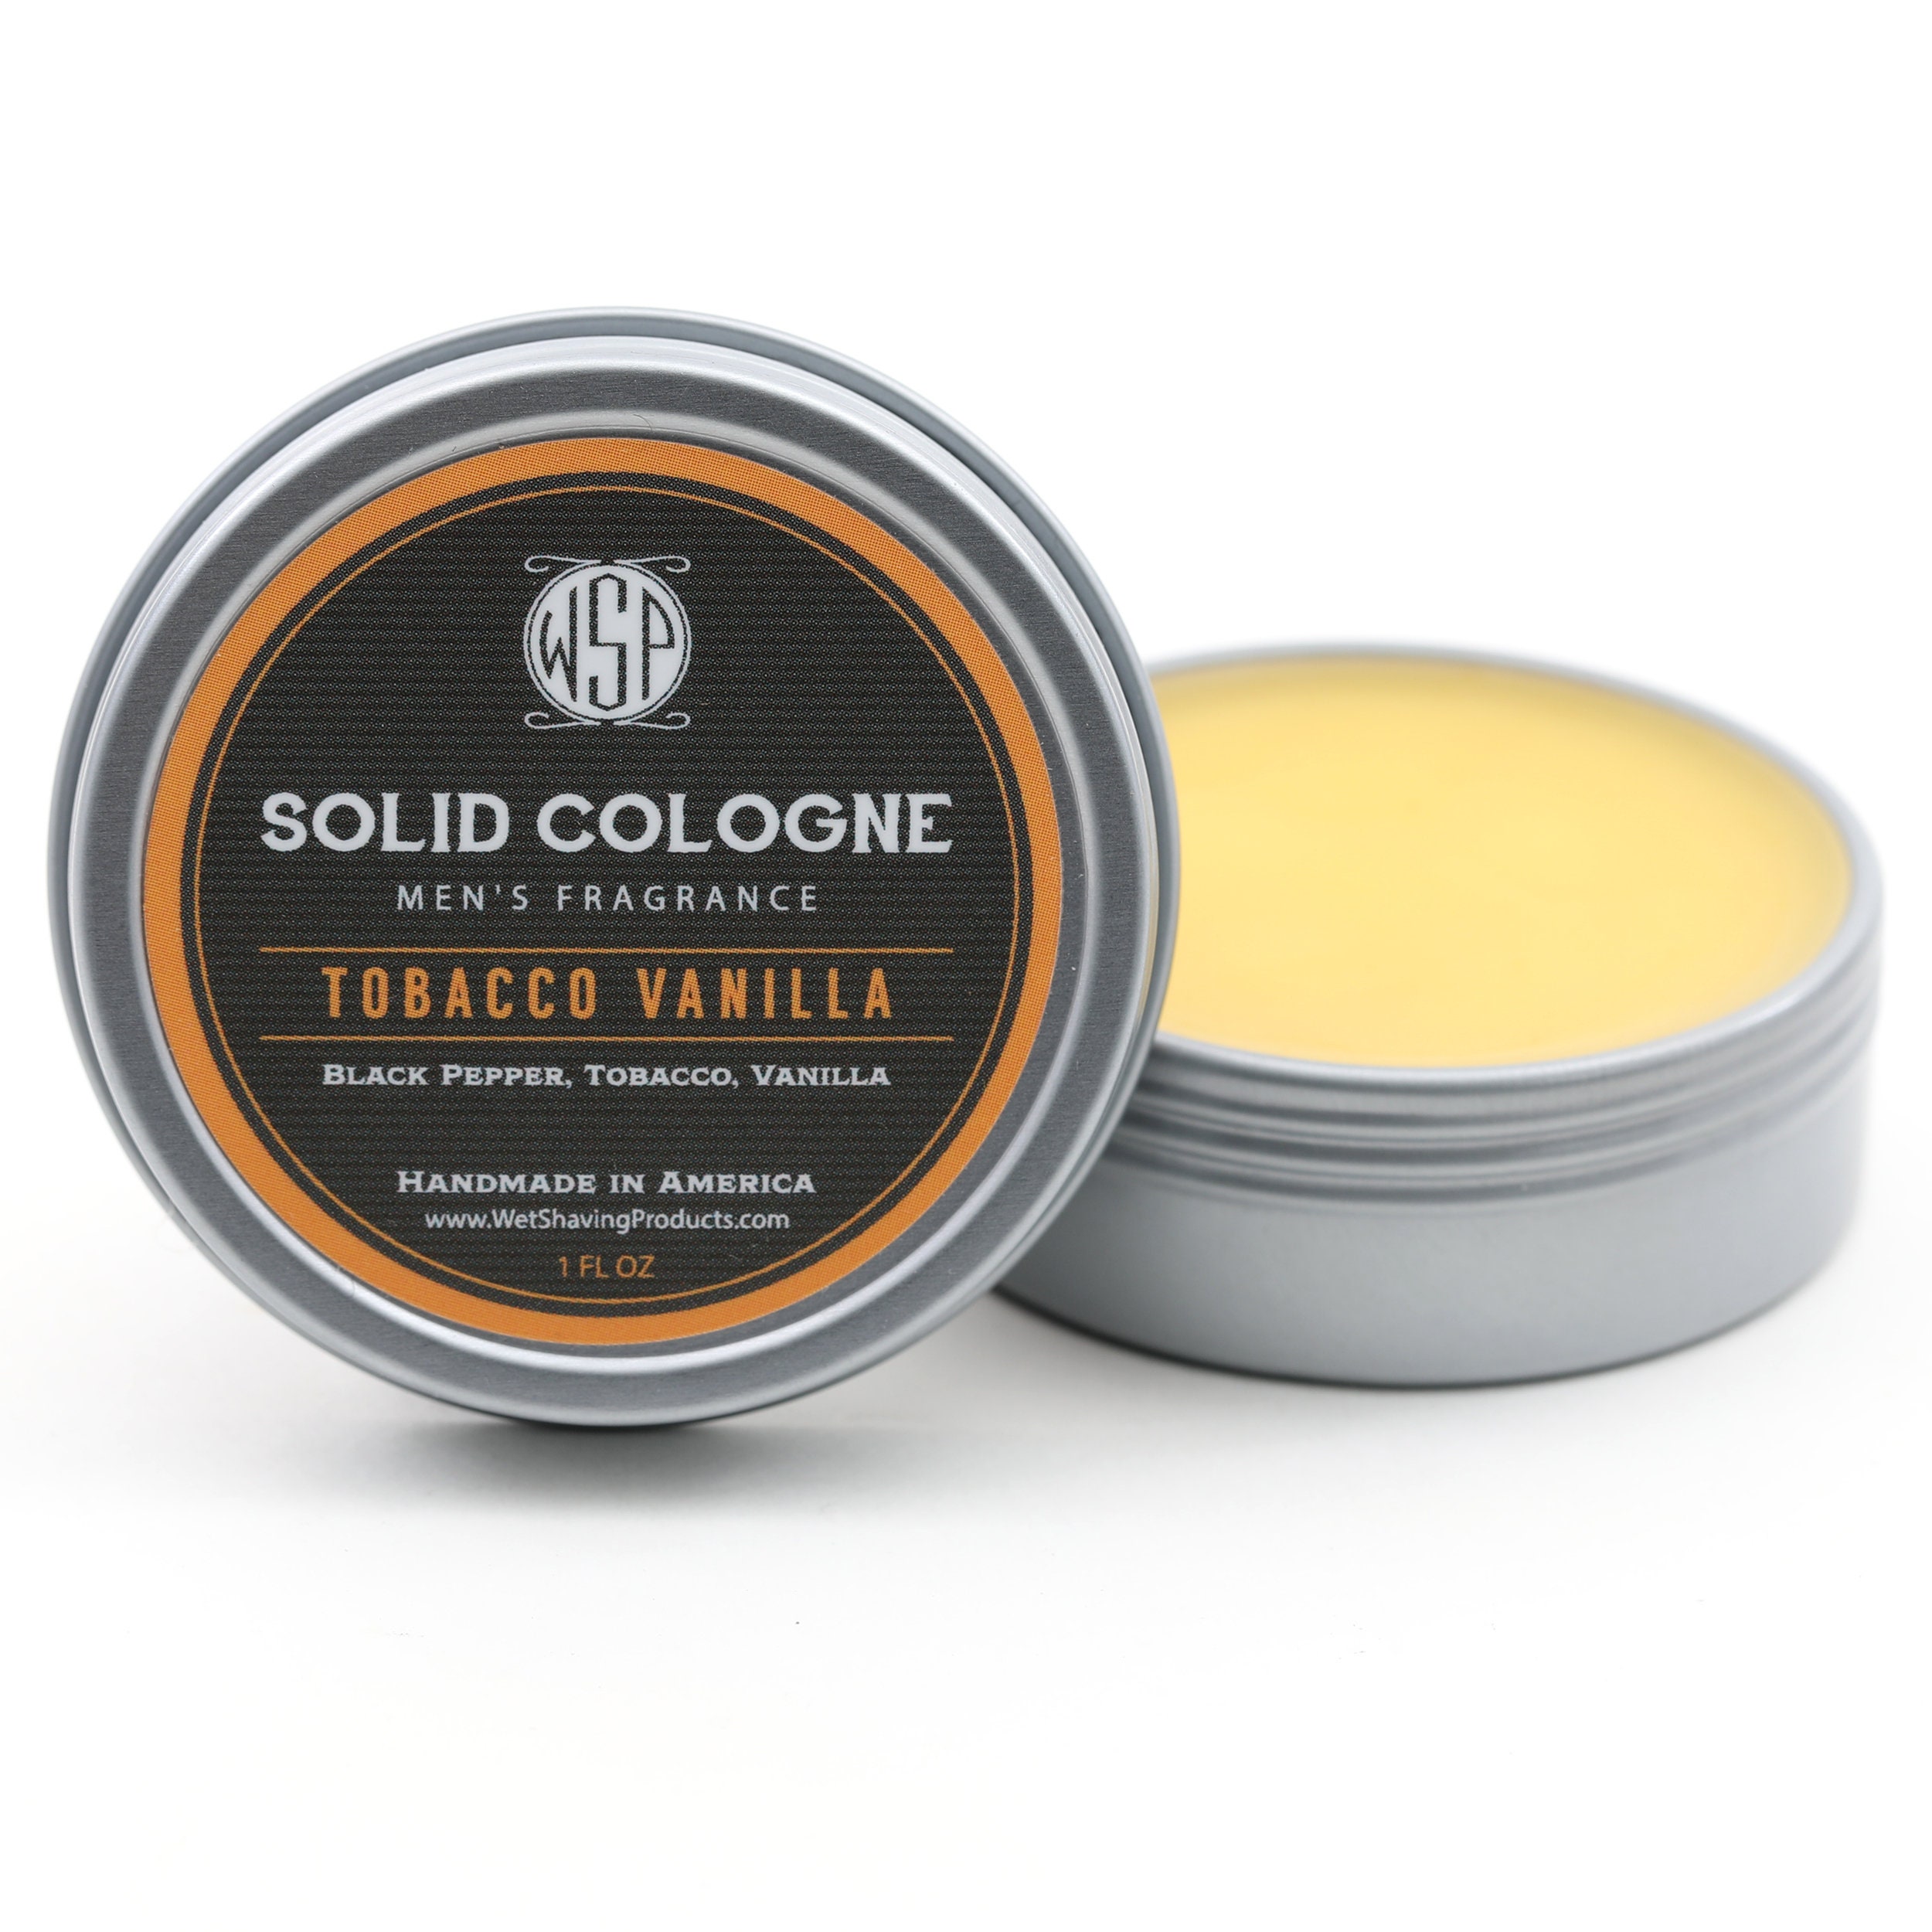  Otter Wax Spruce Cologne Solid, 1oz, All-Natural Fragrance